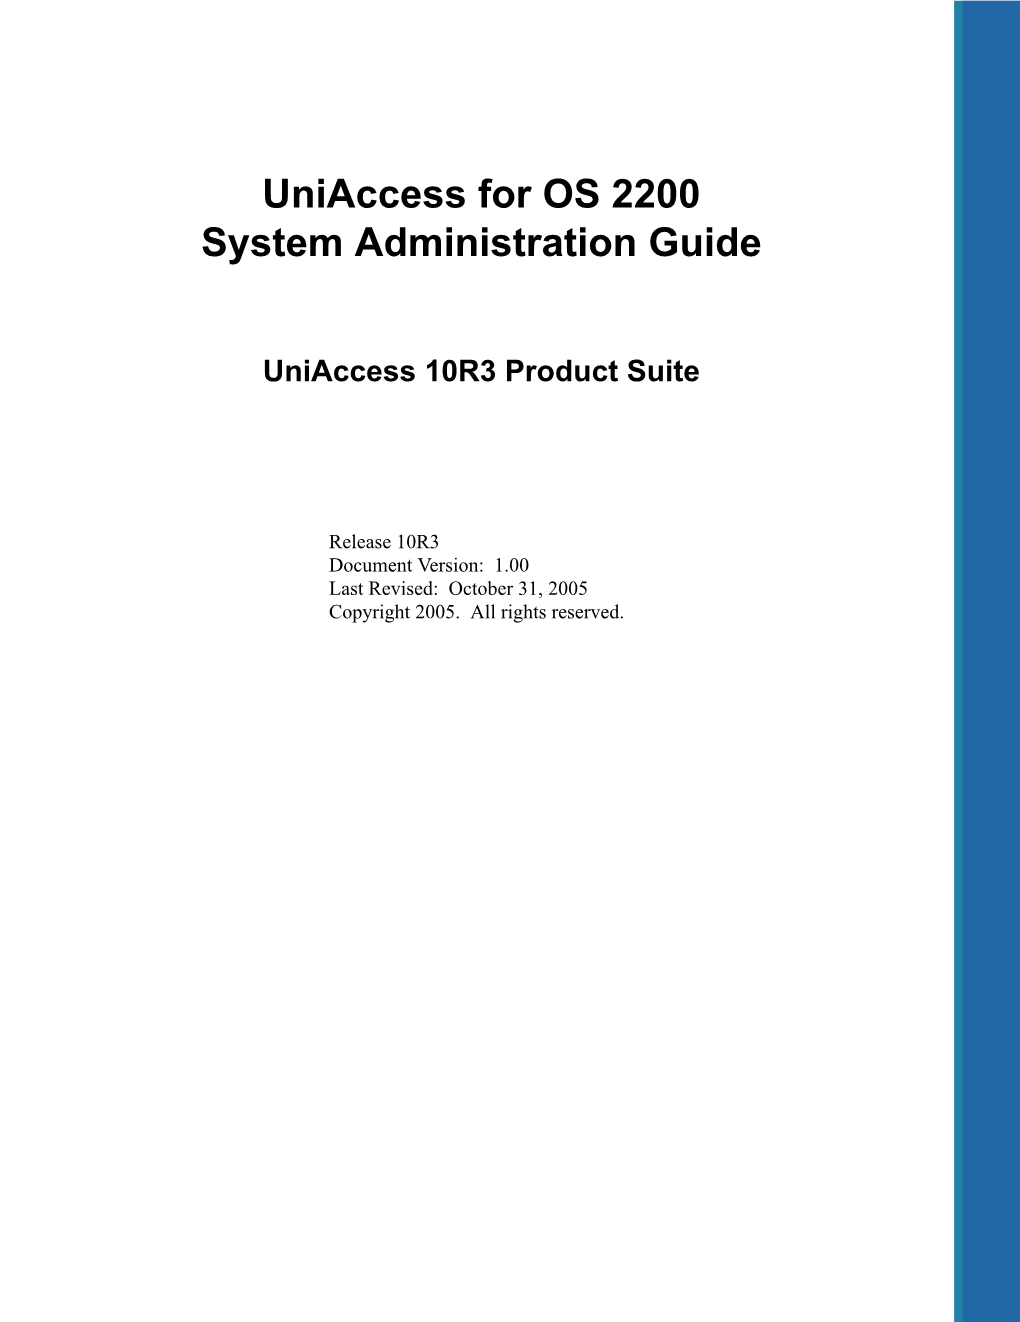 Uniaccess for OS 2200 System Administration Guide